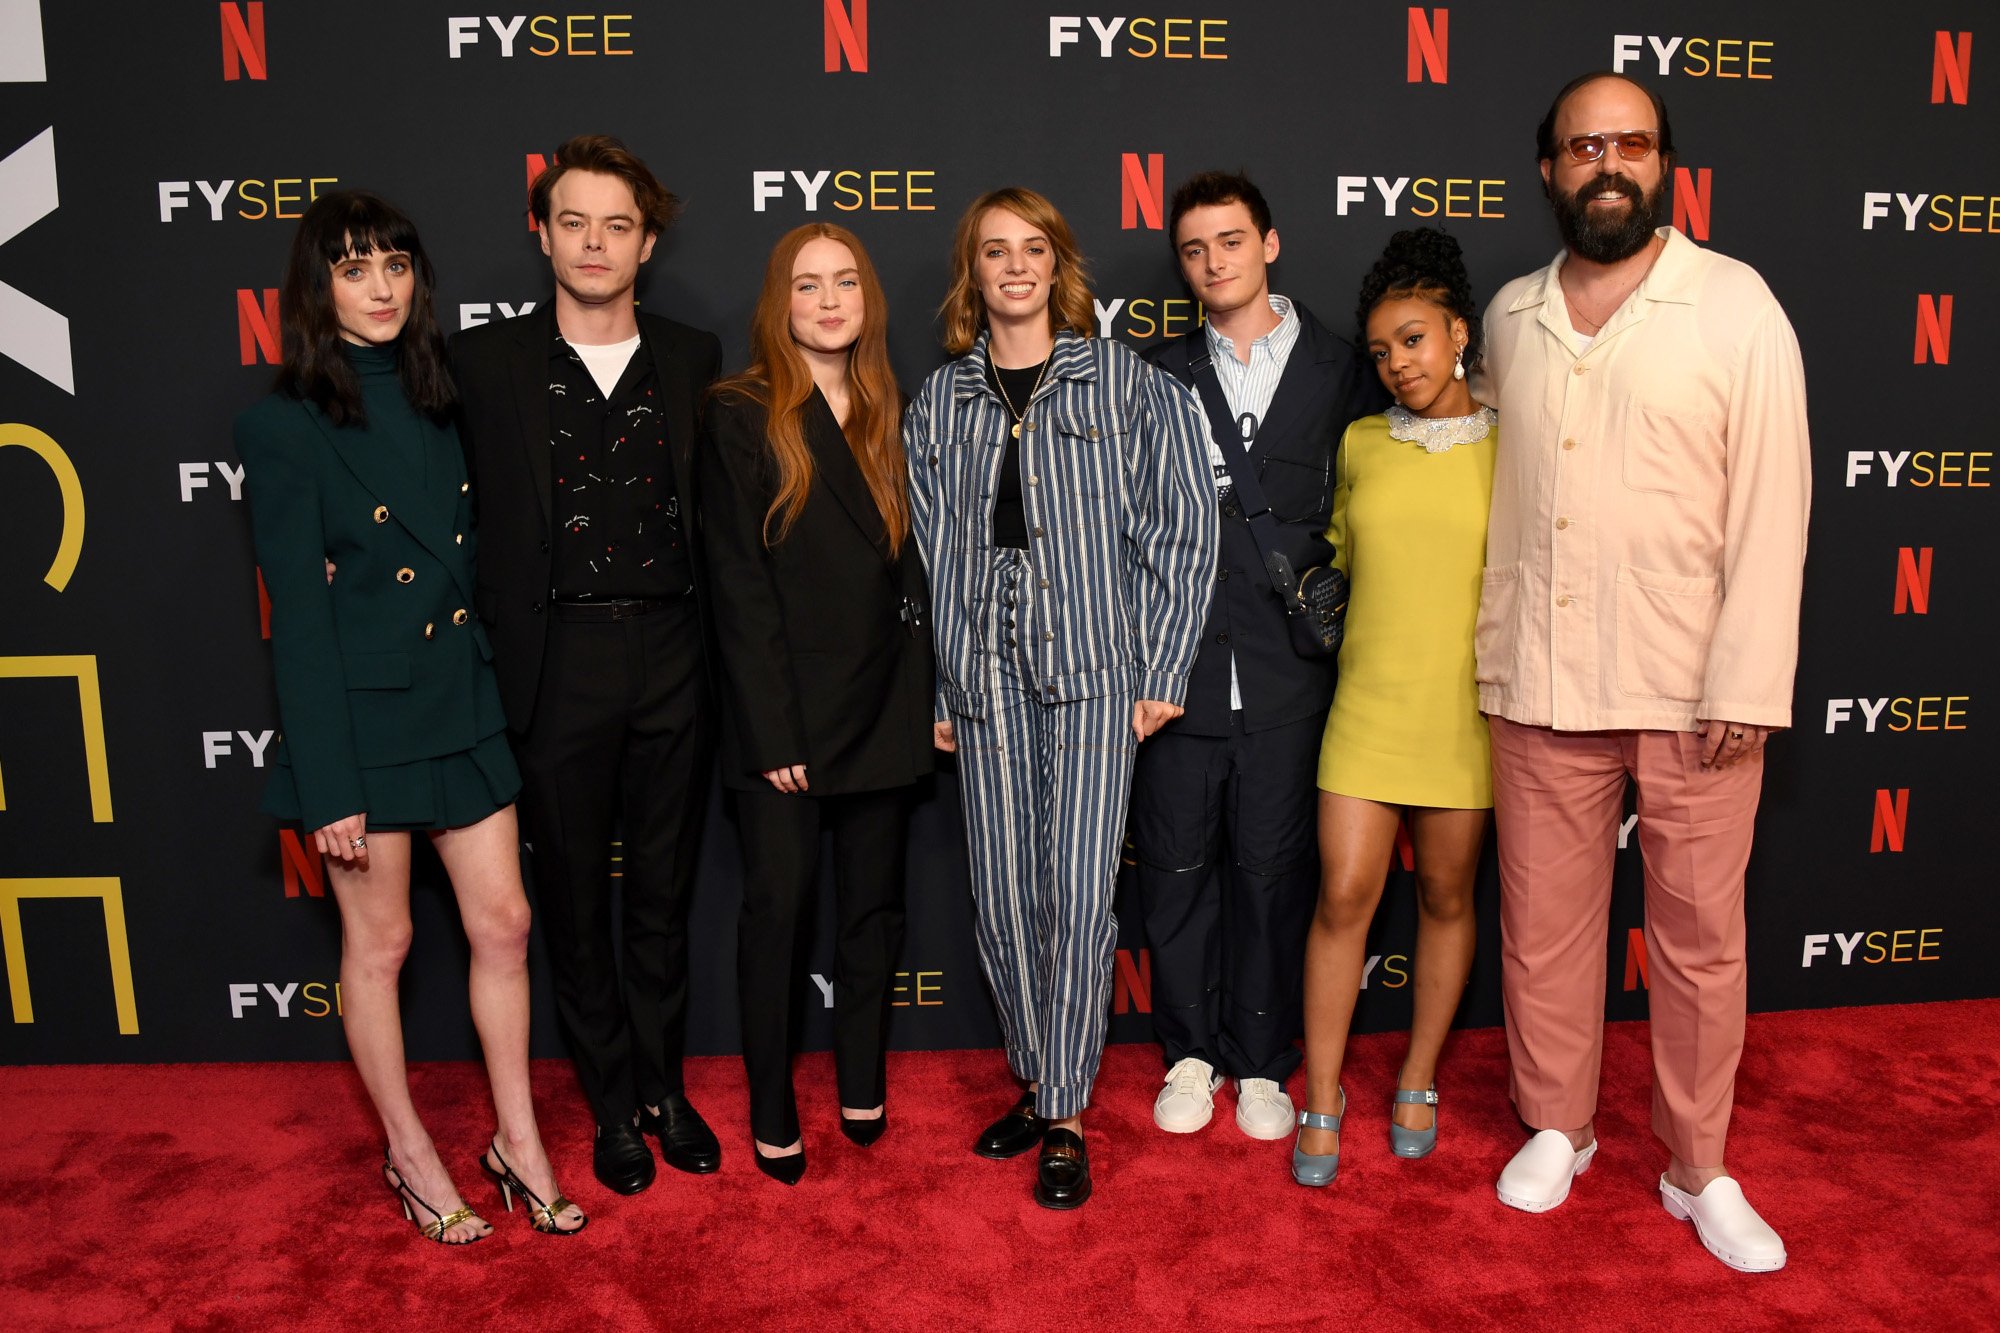 Where to Watch the 'Stranger Things' Cast After Season 4